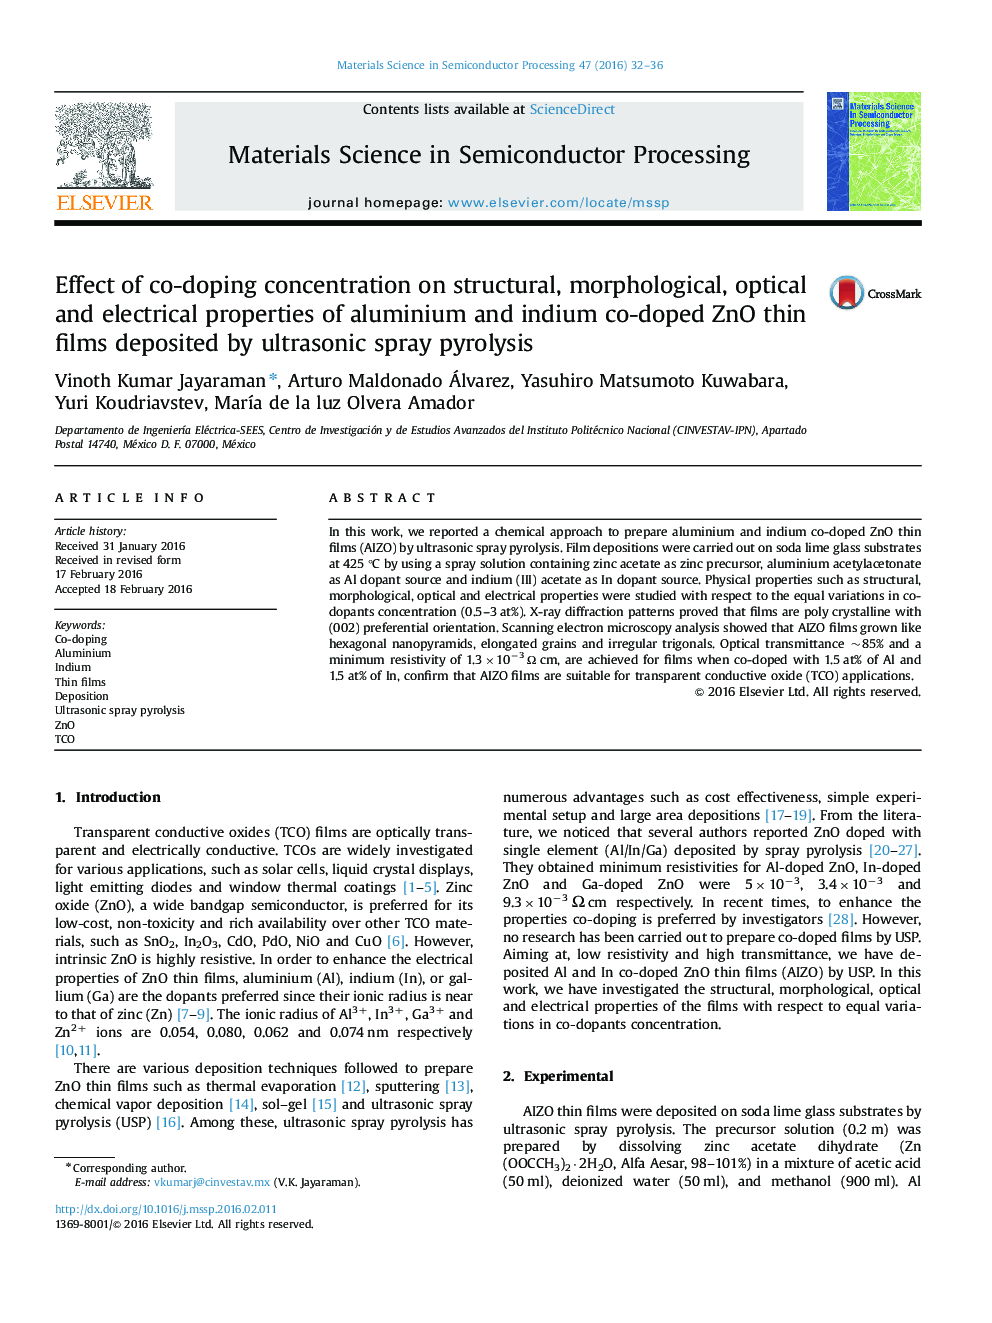 Effect of co-doping concentration on structural, morphological, optical and electrical properties of aluminium and indium co-doped ZnO thin films deposited by ultrasonic spray pyrolysis